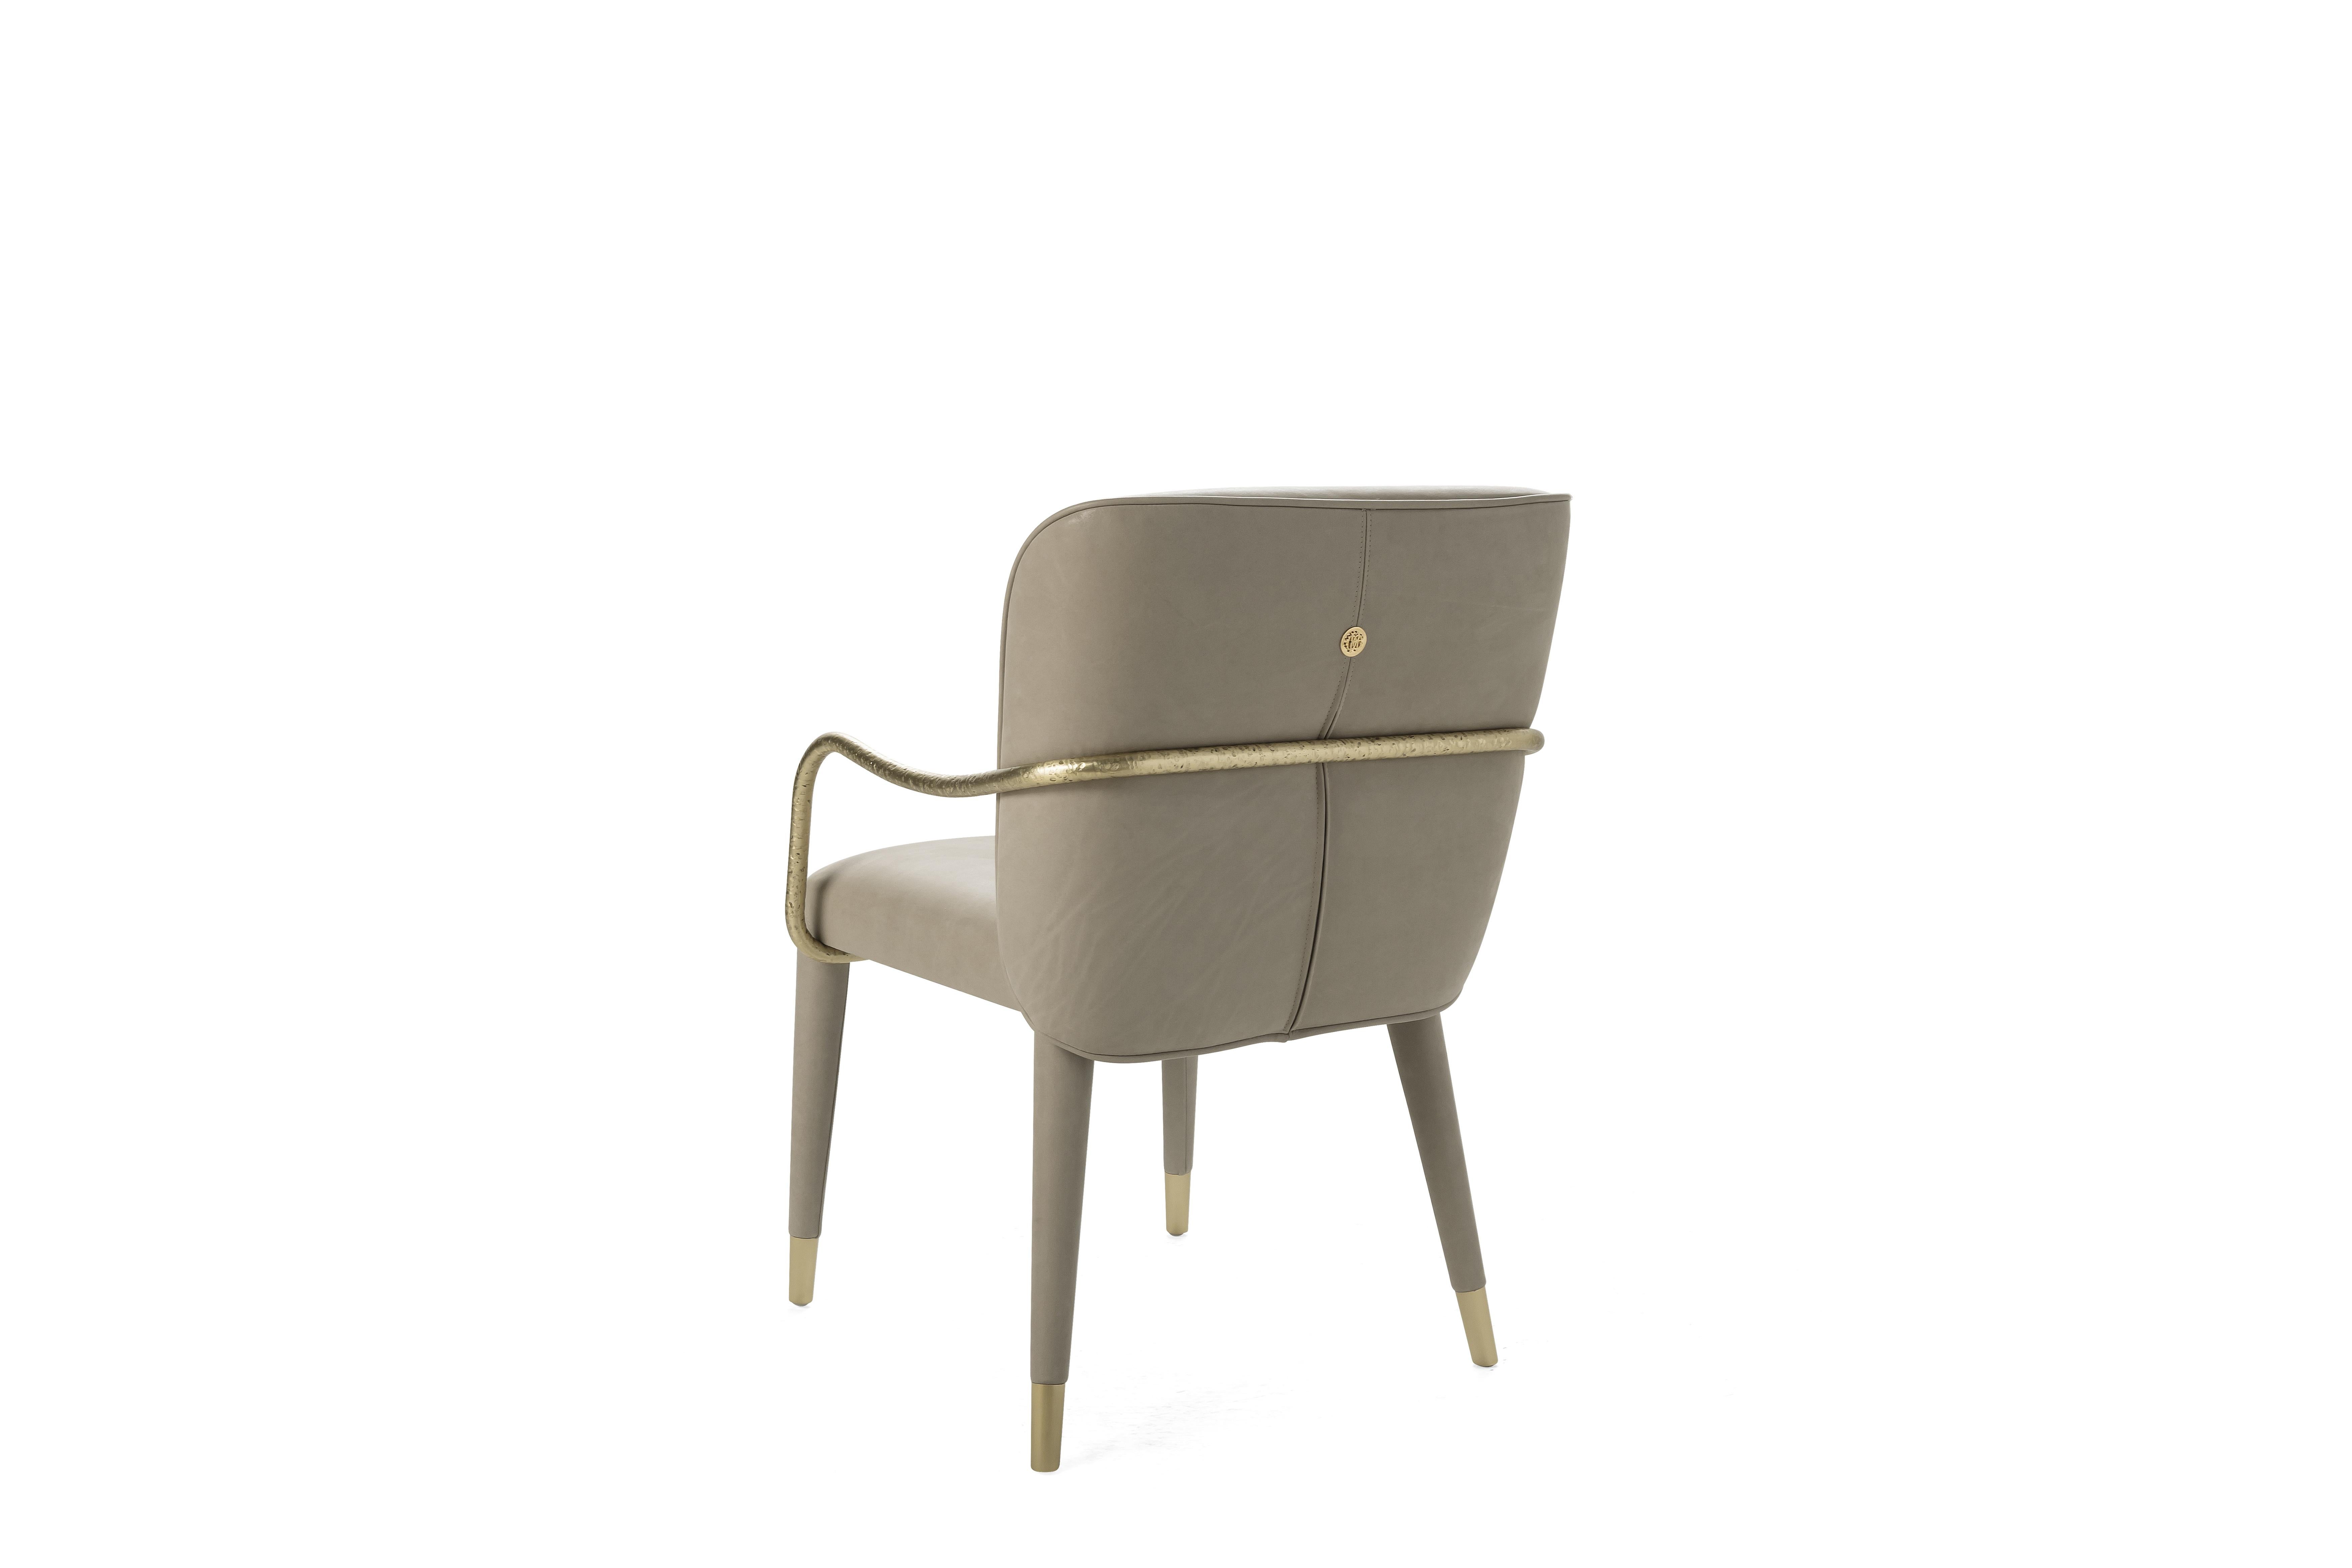 Italian 21st Century Kivu Chair in Leather by Roberto Cavalli Home Interiors For Sale